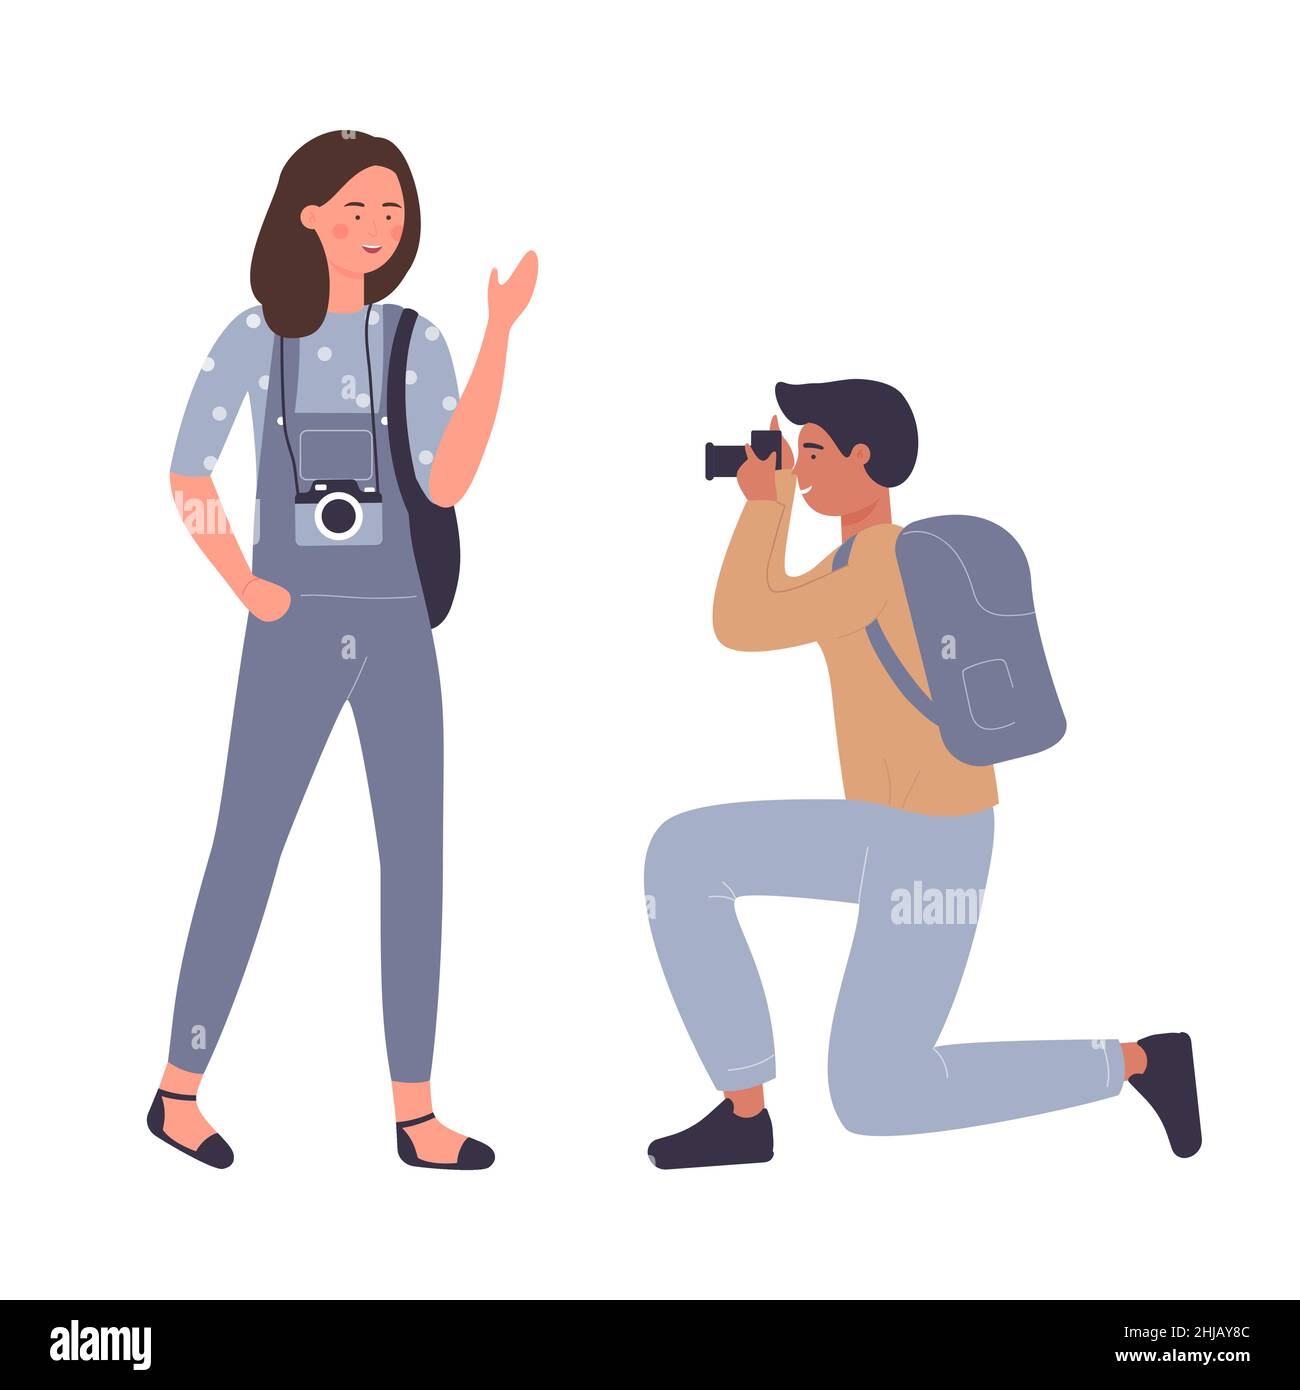 Boy with backpack photographing smiling girl. Professional tourist photoshoot process cartoon vector illustration Stock Vector